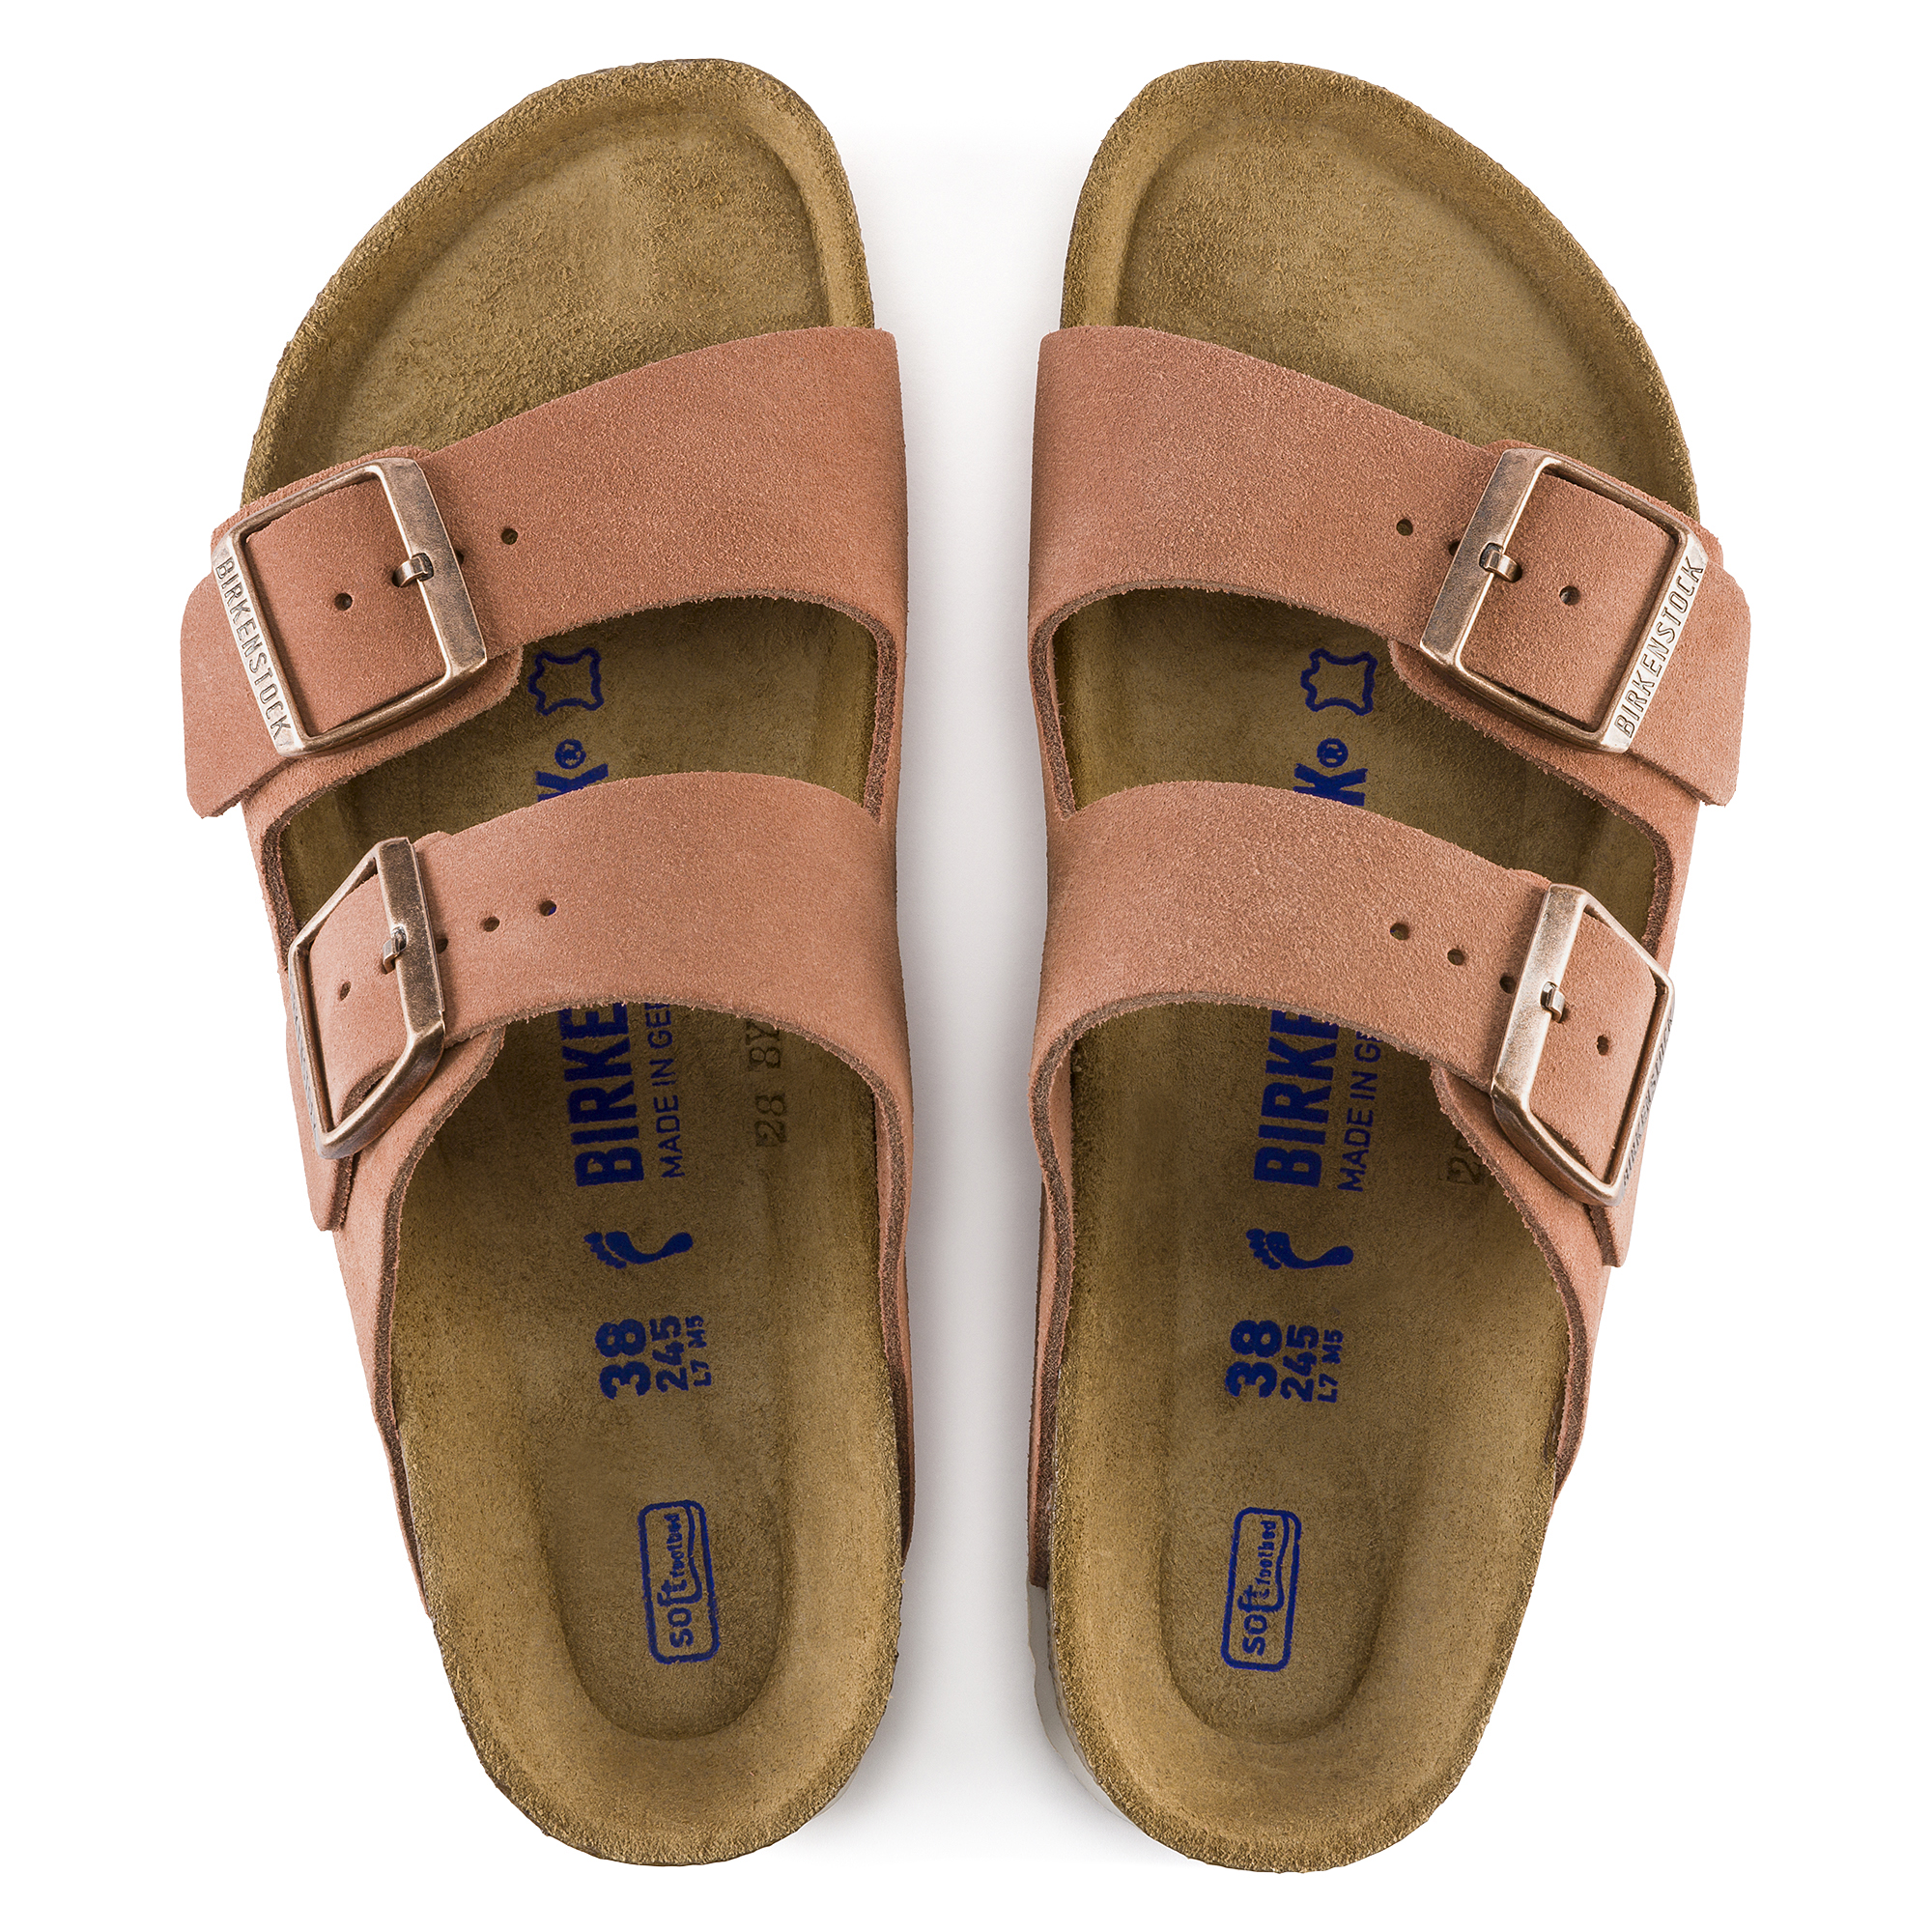 birkenstock buy now pay later